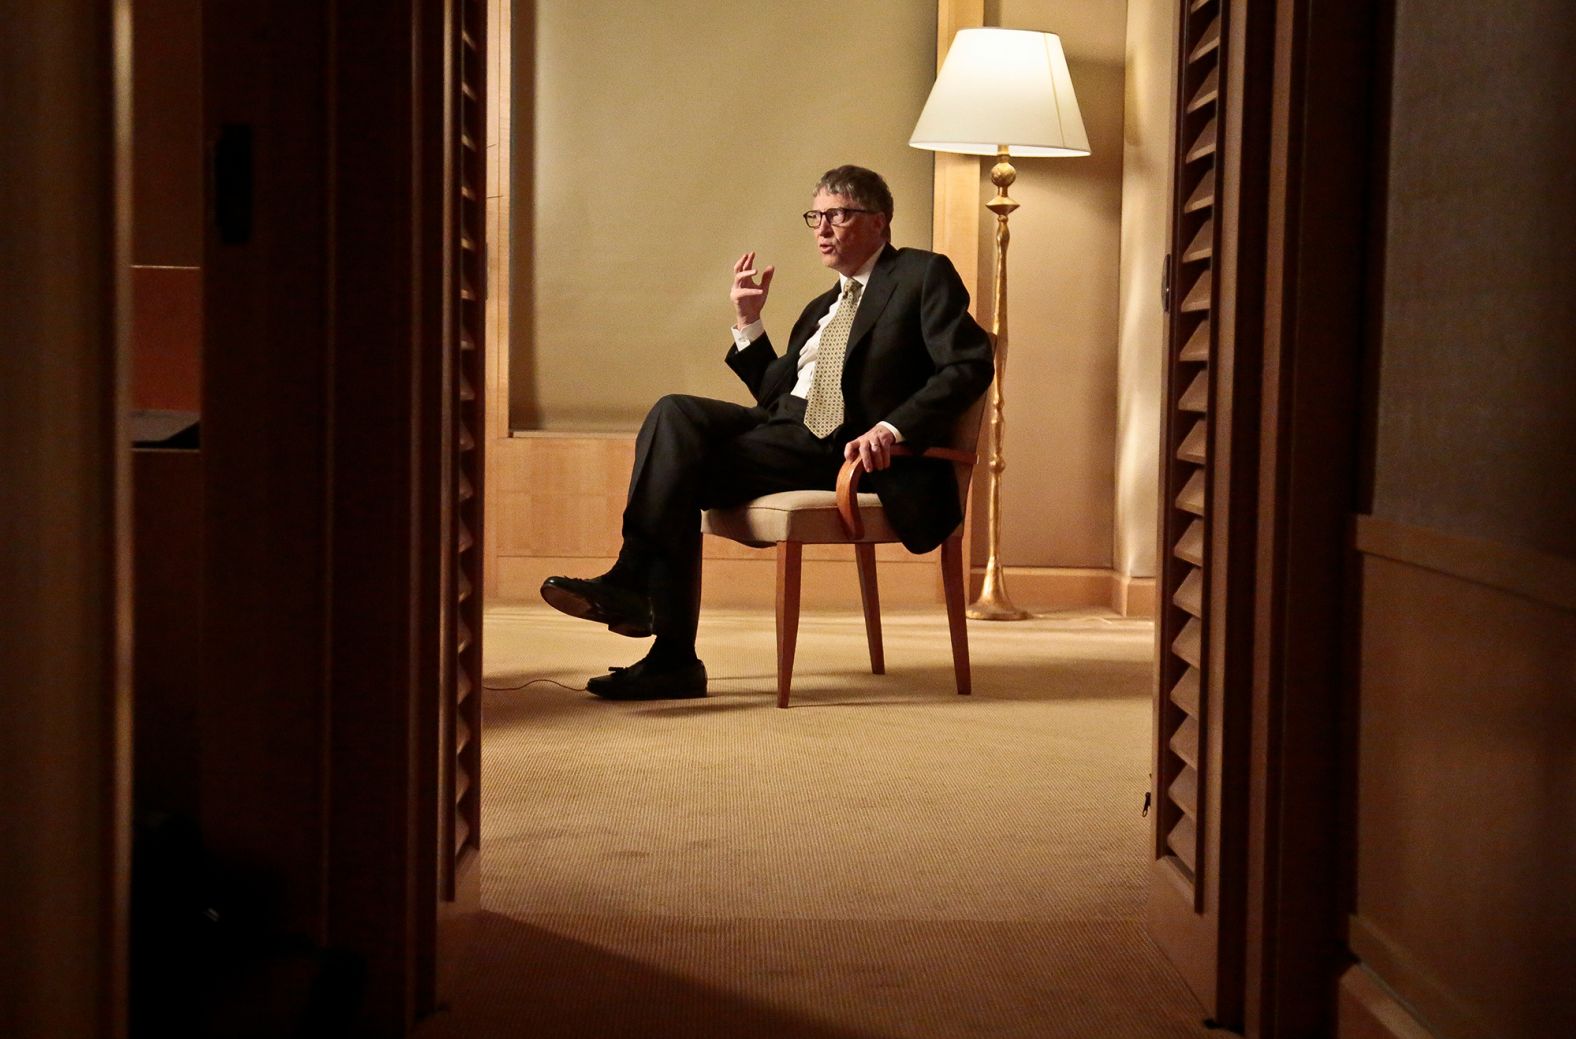 Gates speaks during an interview in New York in 2014.